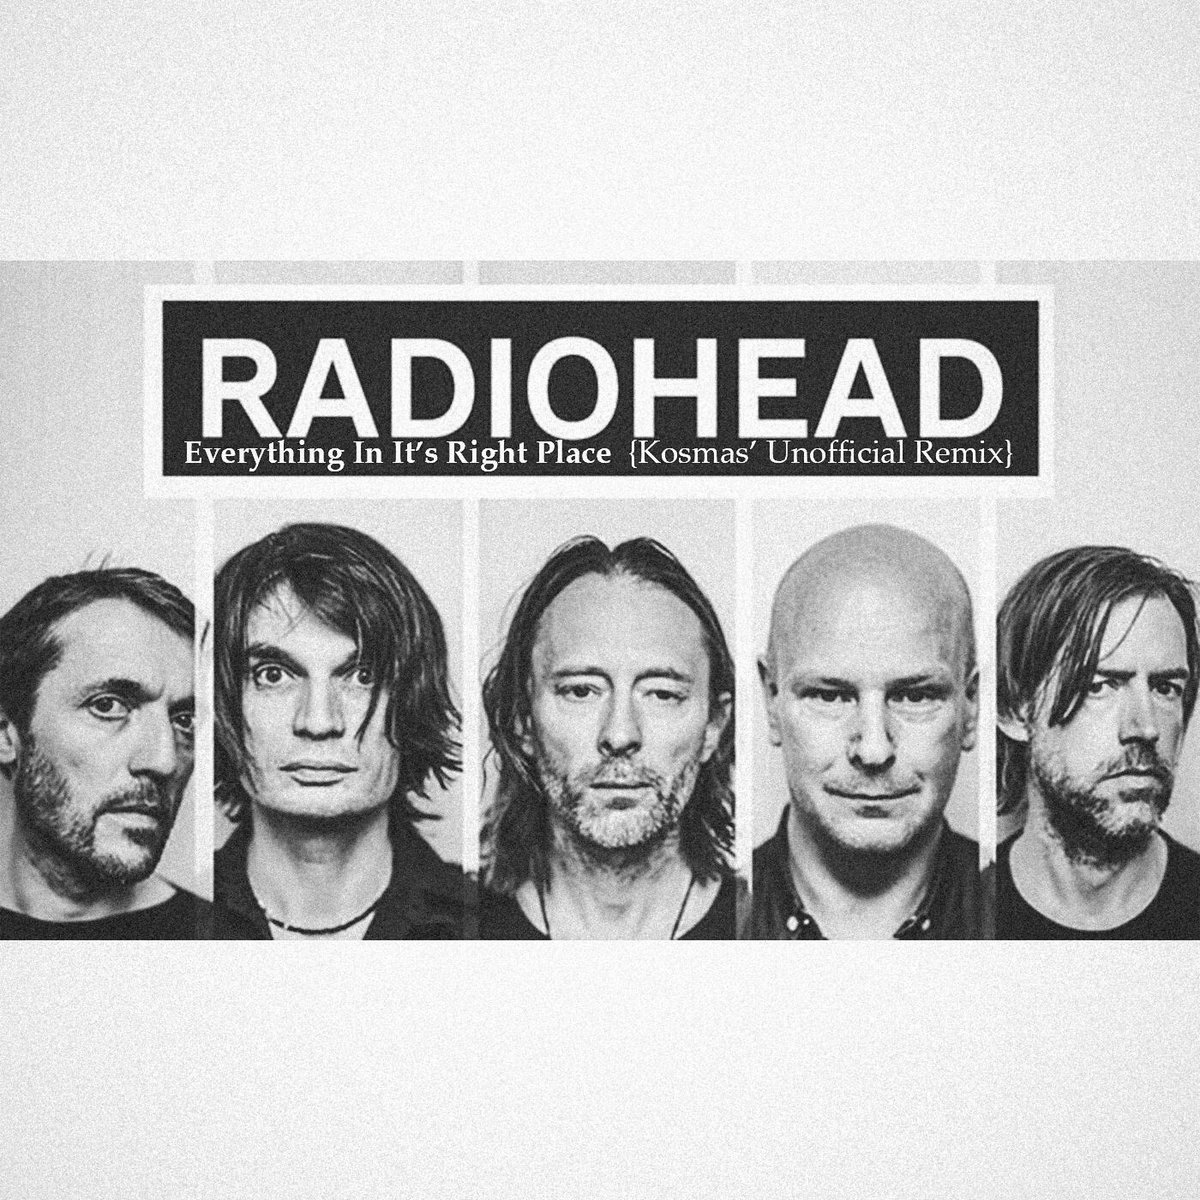 https://soundcloud.com/strippedmusicmgmt/free-download-radiohead-everything...